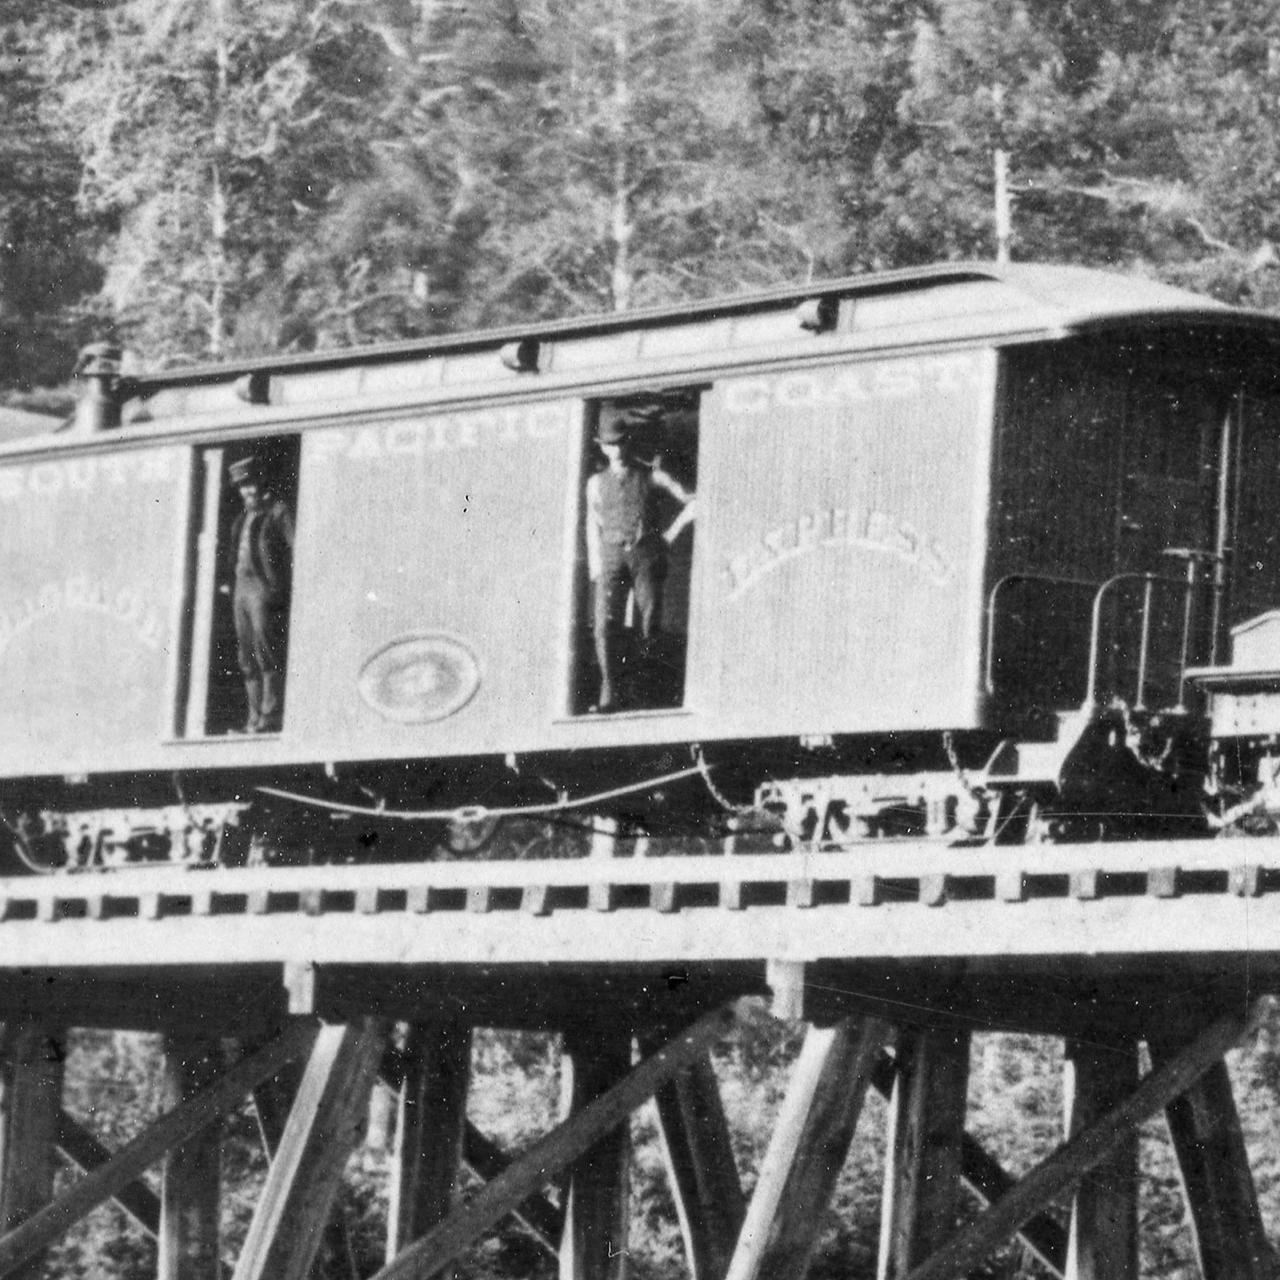 Baggage Express #3 on Big Trees Trestle